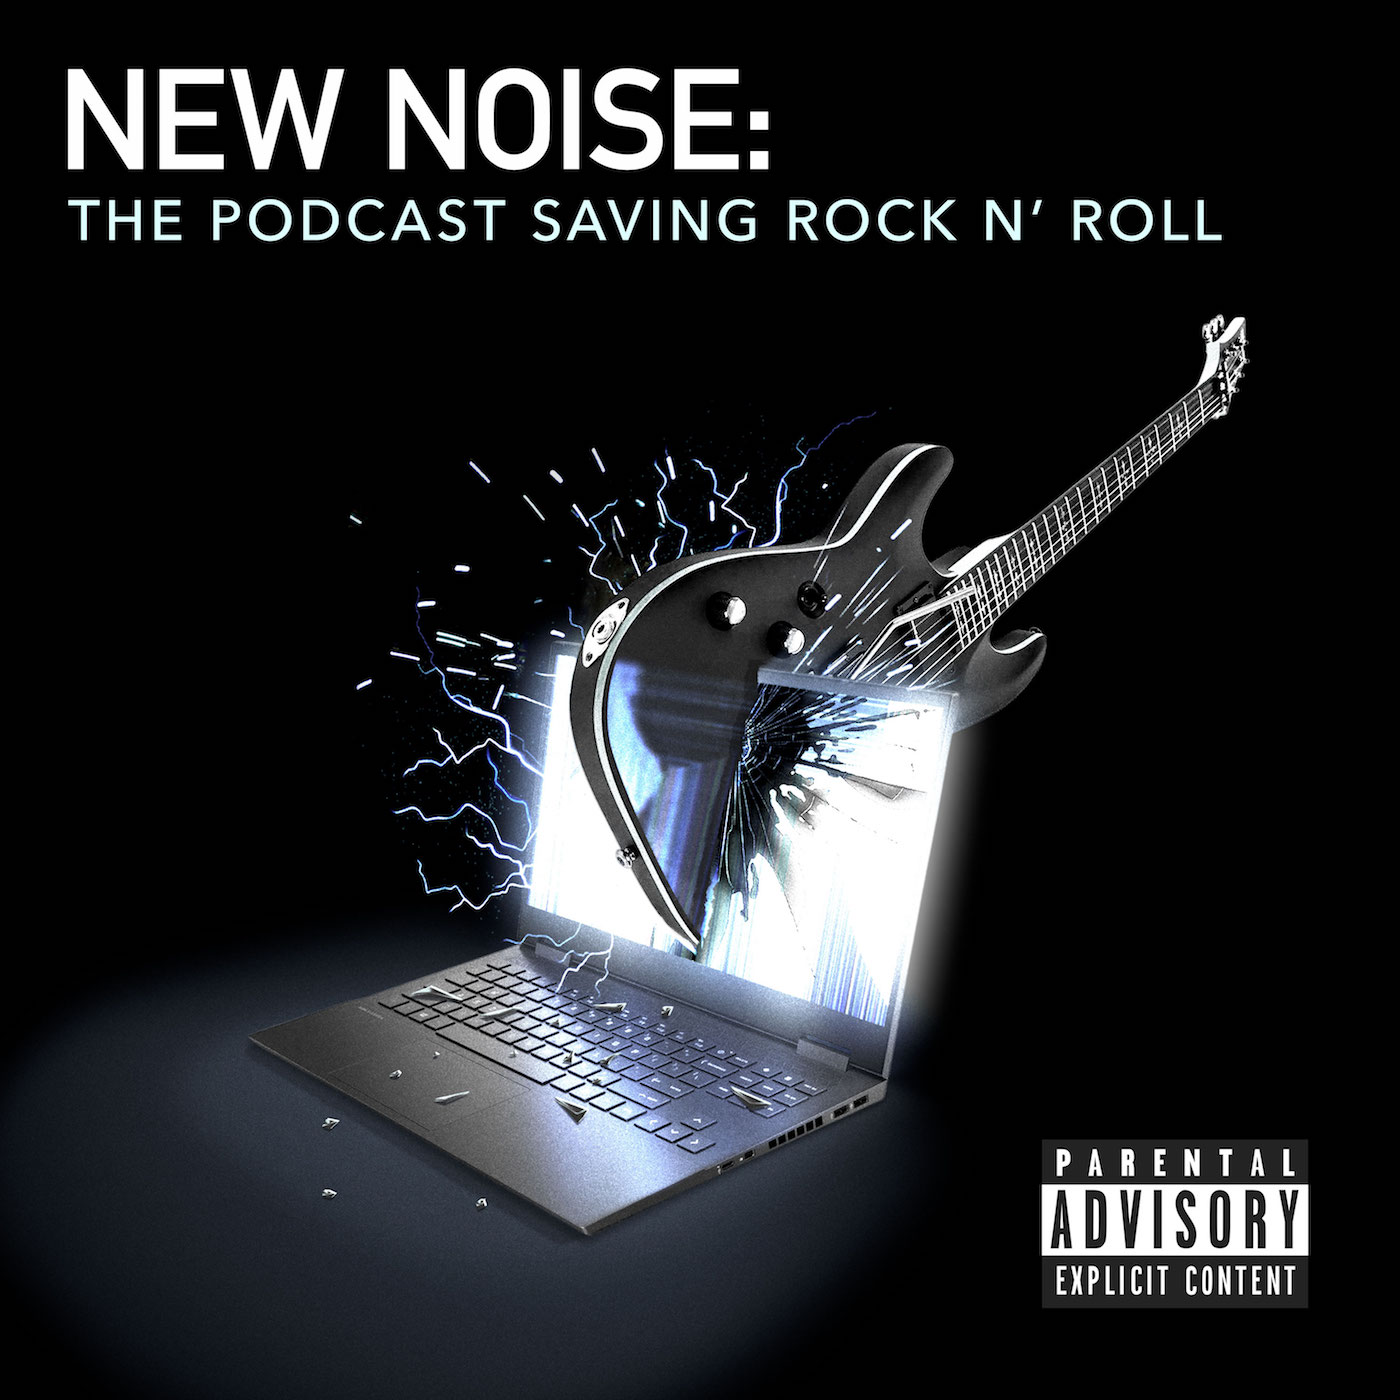 NEW NOISE: The Podcast Saving Rock N' Roll